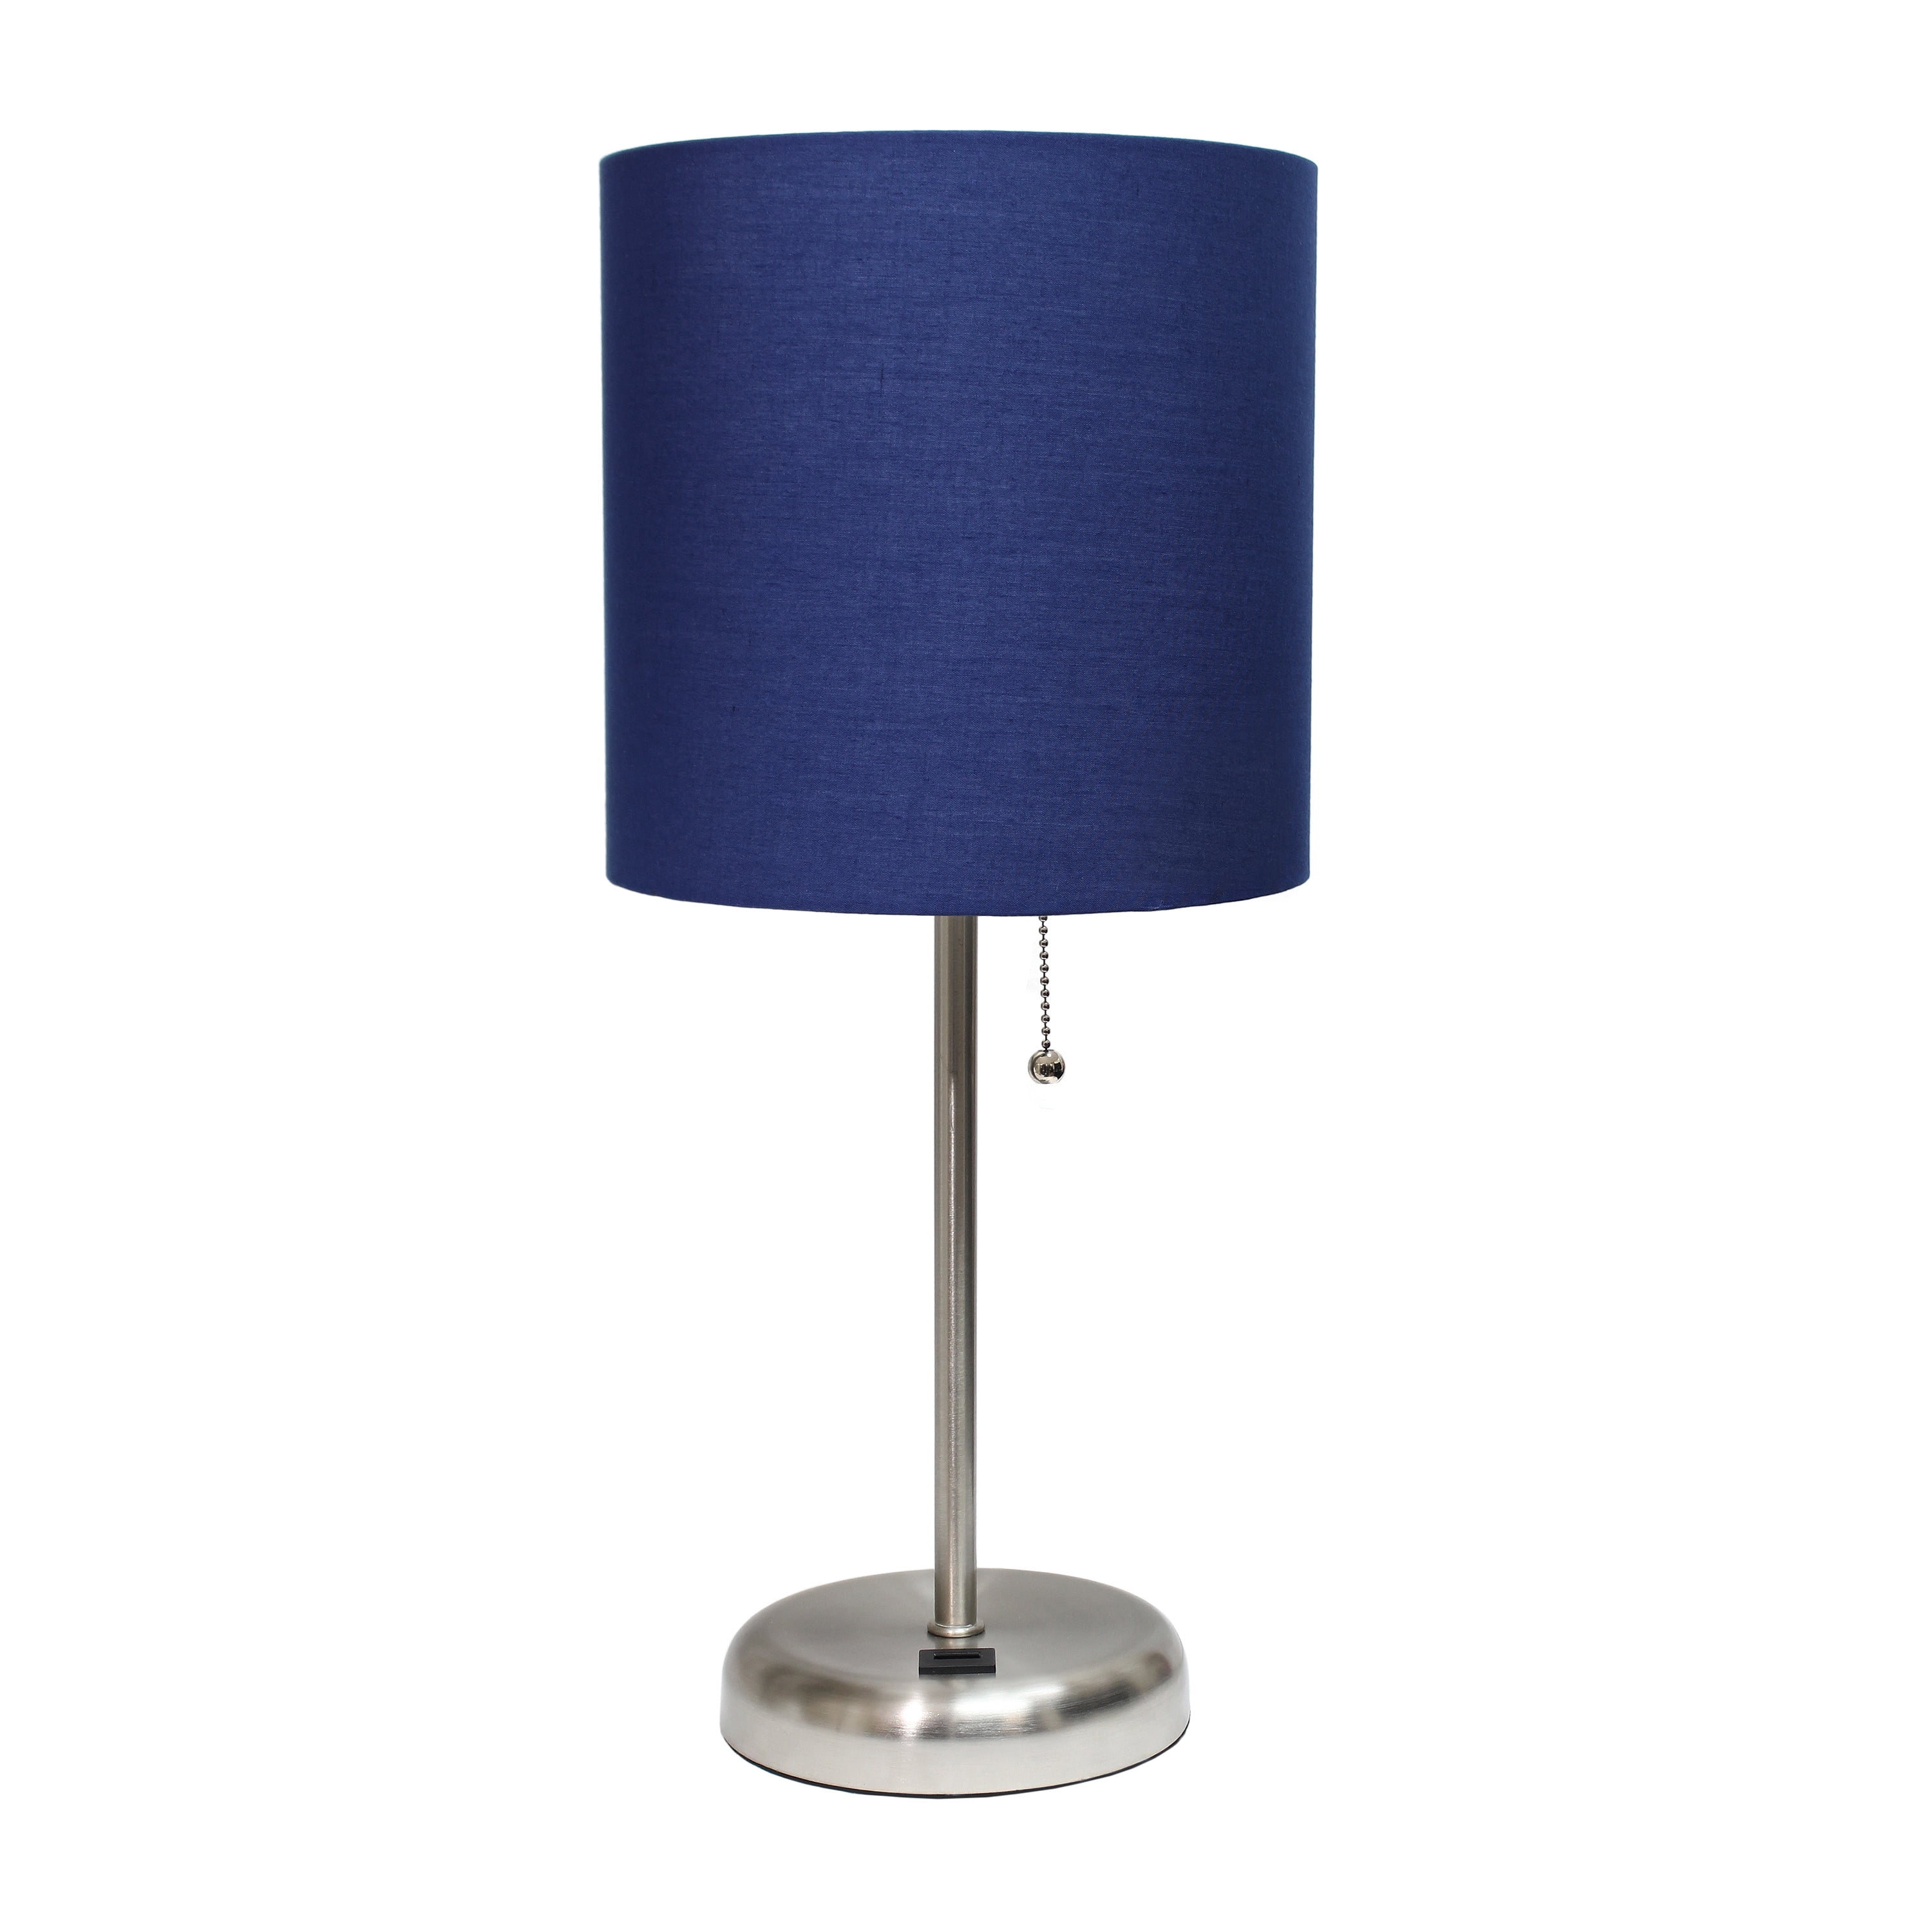 Lt2044-nav Stick Table Lamp With Usb Charging Port & Fabric Shade, Navy